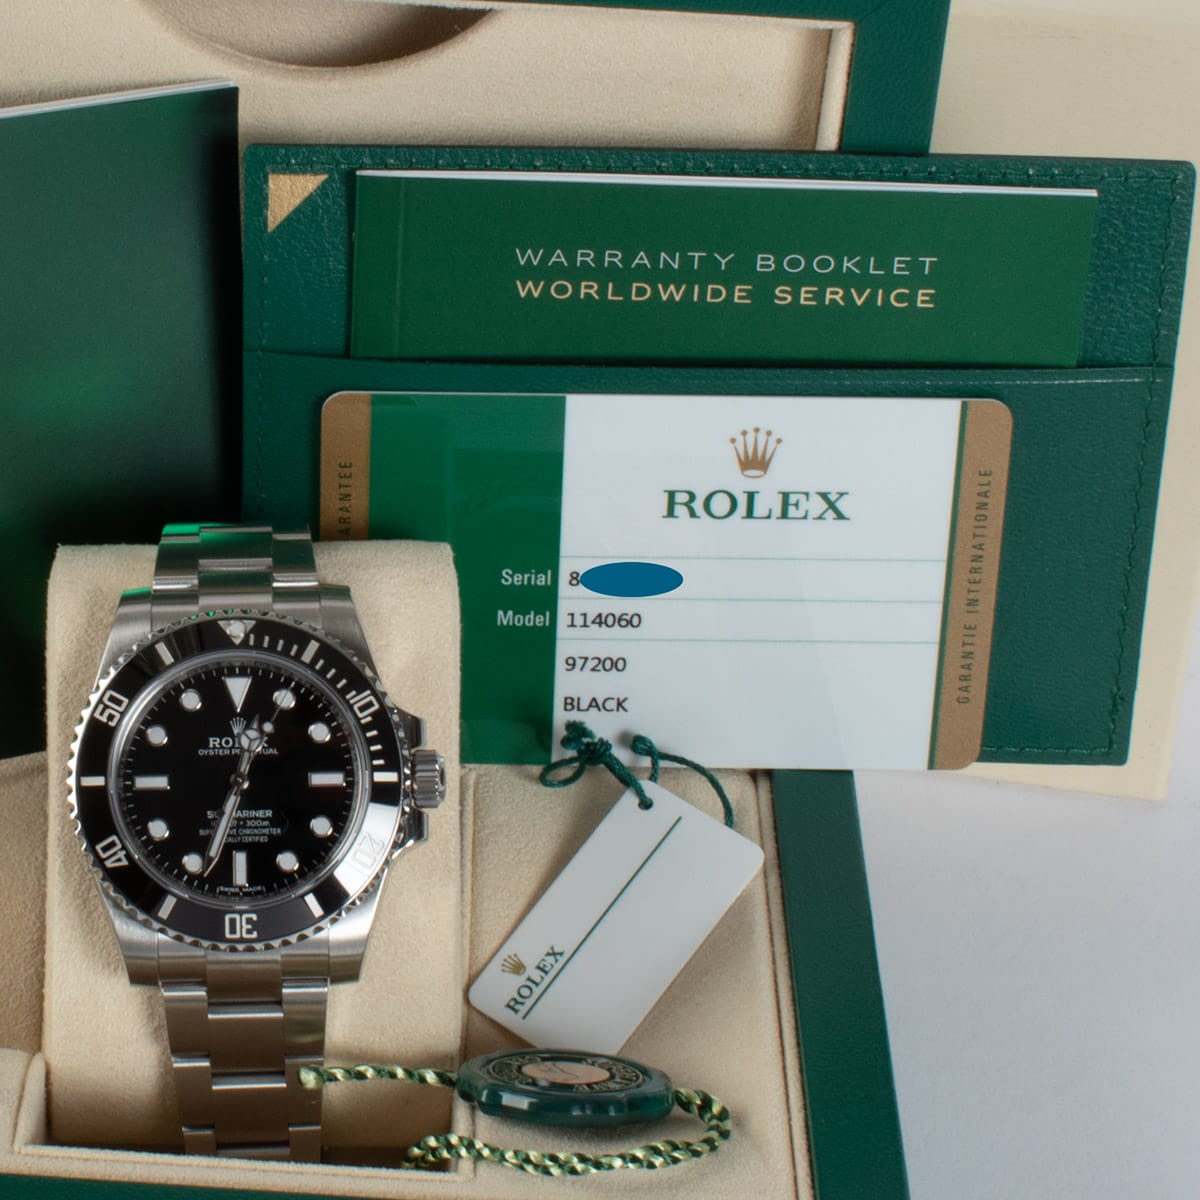 View in Box of Submariner